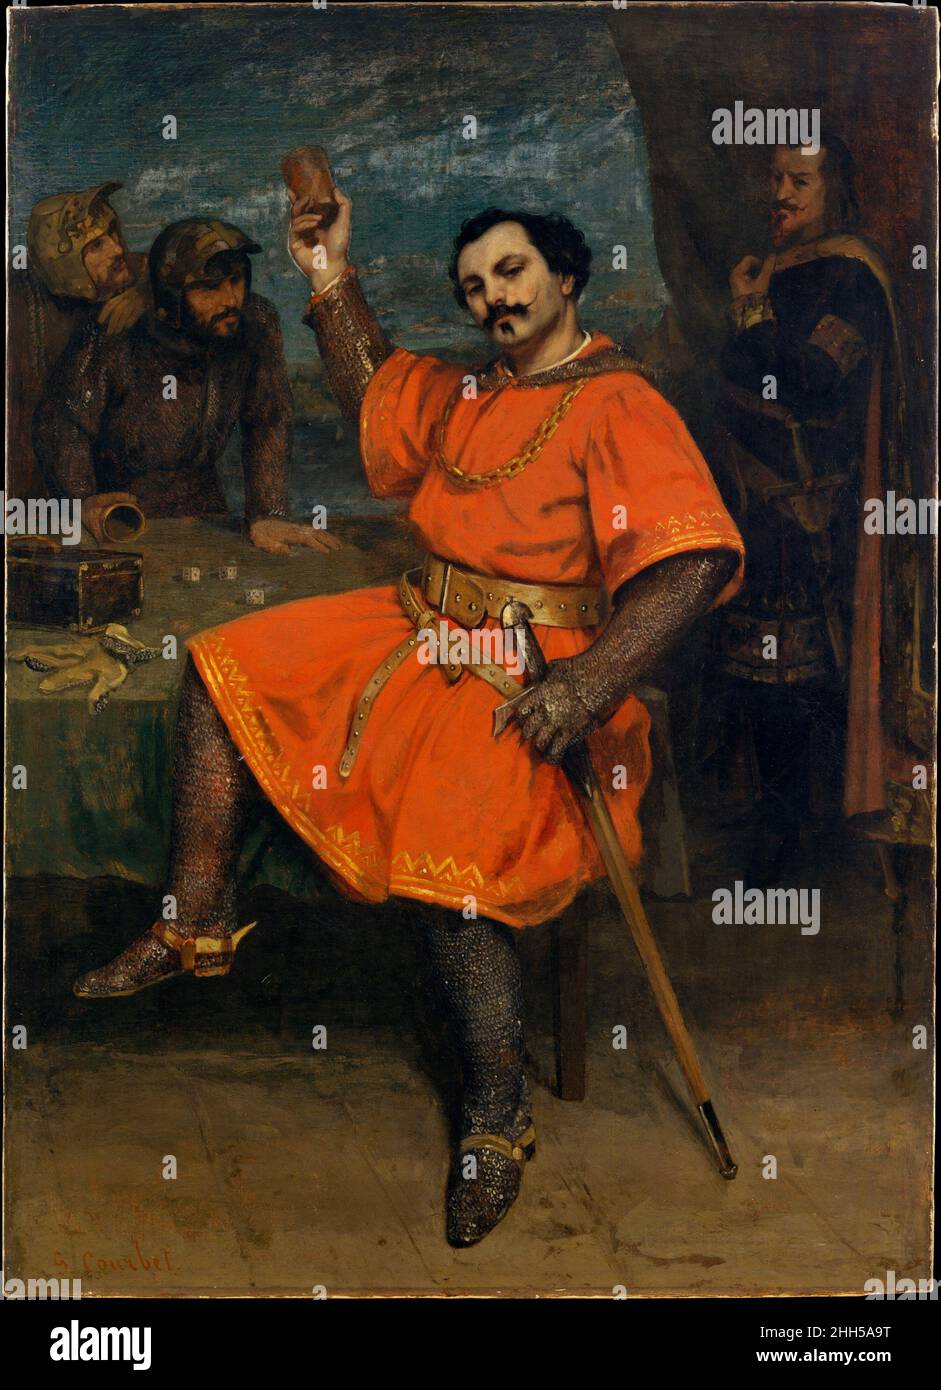 Louis Gueymard (1822–1880) as Robert le Diable 1857 Gustave Courbet French This painting, shown at the Salon of 1857, depicts the tenor Louis Gueymard in his most famous part, the title role of Meyerbeer’s opera Robert le Diable. The setting is the cavern where Robert plays dice with two servants of the devil while his father Bertram, an evil genius, looks on. In this scene Robert sings about the dangers of the lust for gold in the celebrated aria L’or est une chimère (Gold is but an illusion).. Louis Gueymard (1822–1880) as Robert le Diable. Gustave Courbet (French, Ornans 1819–1877 La Tour-d Stock Photo